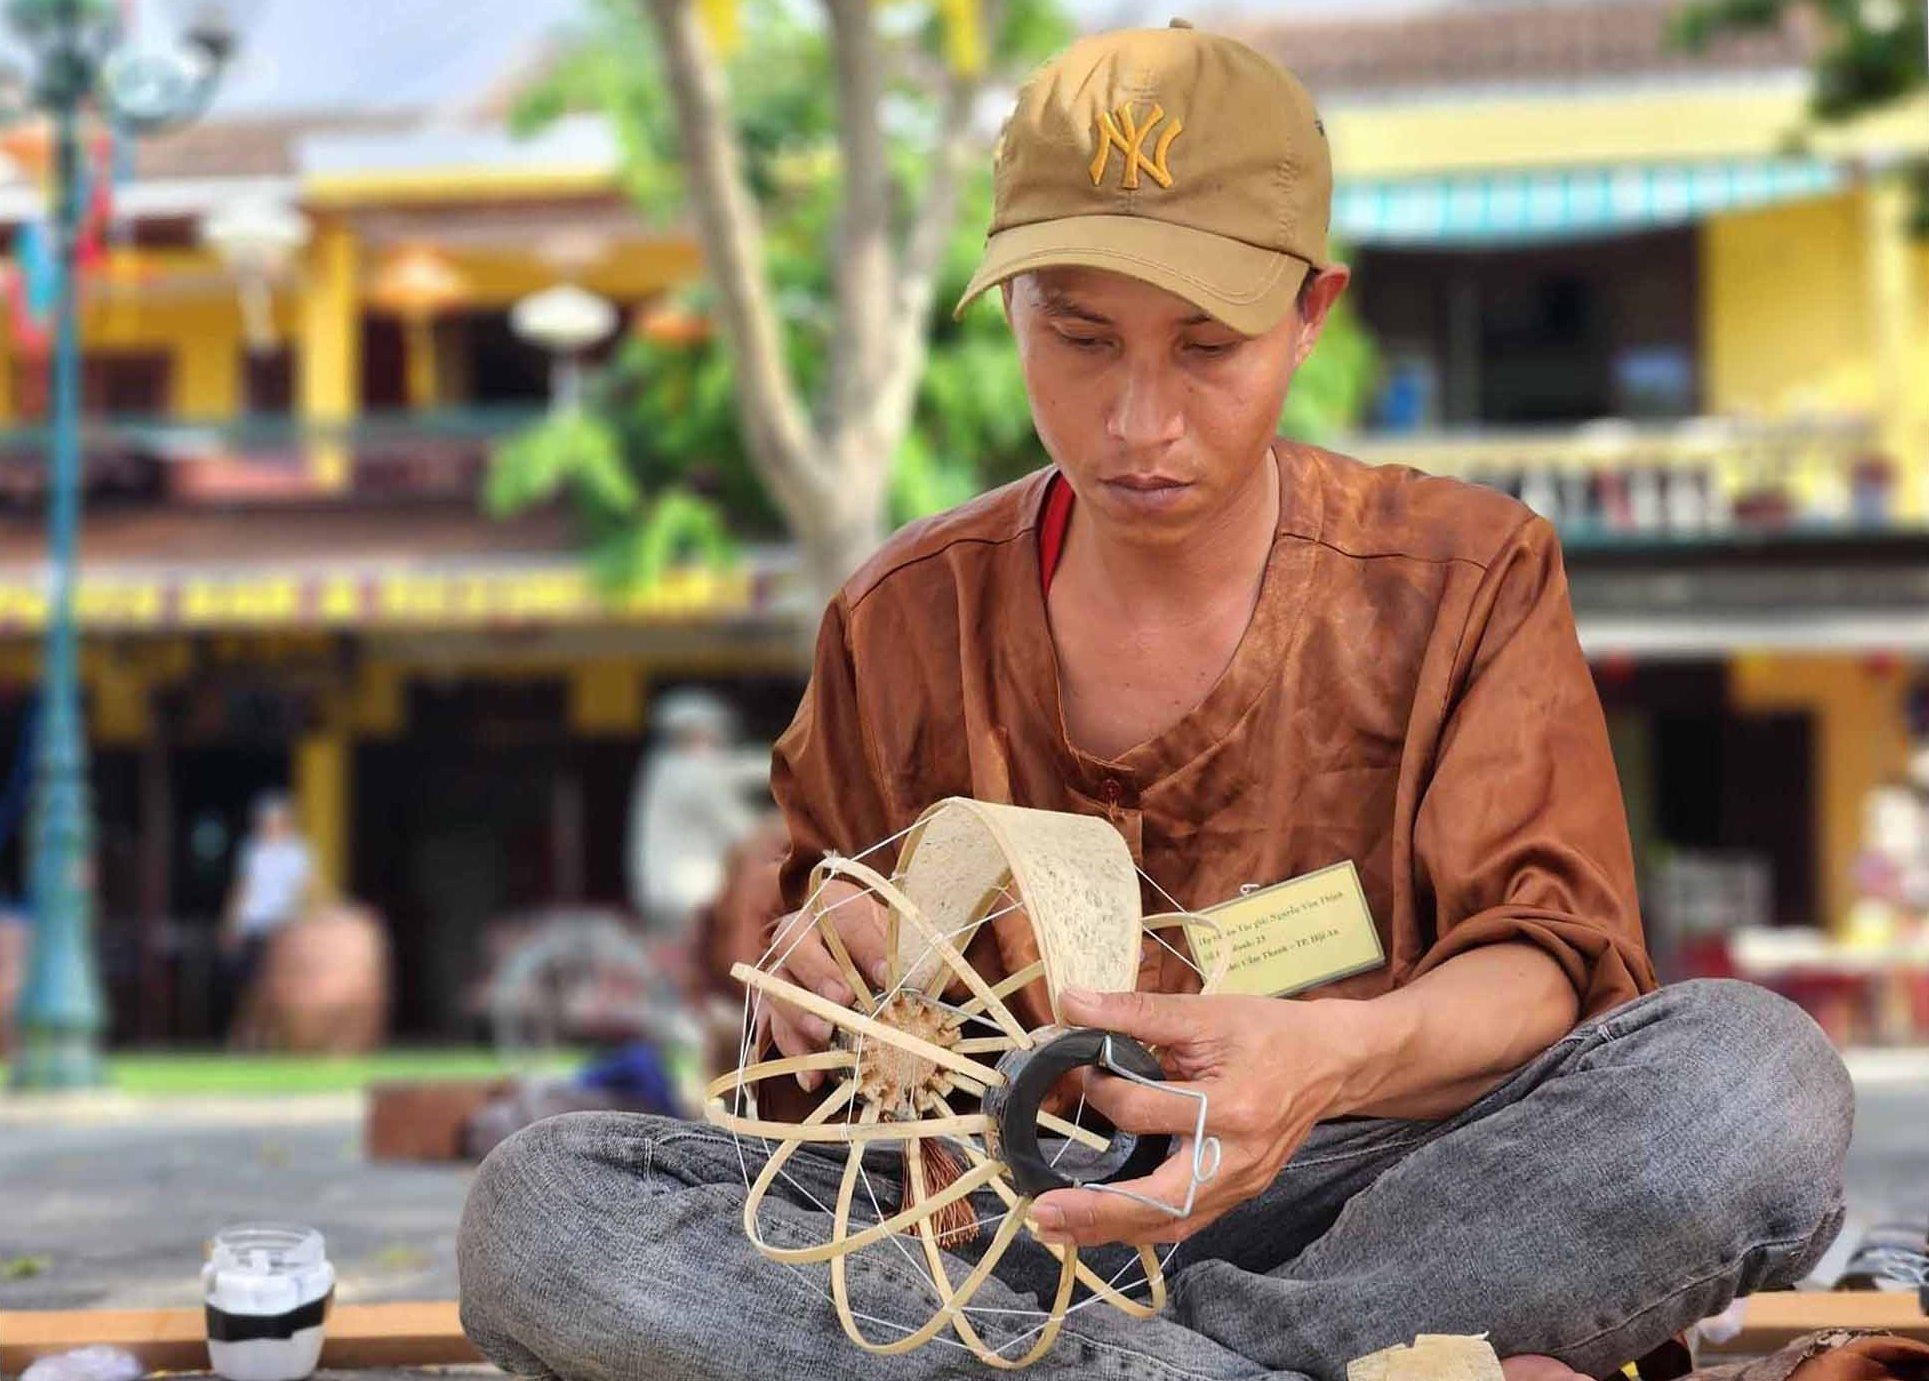 Lantern making – one of the most interesting experiences in Vietnam